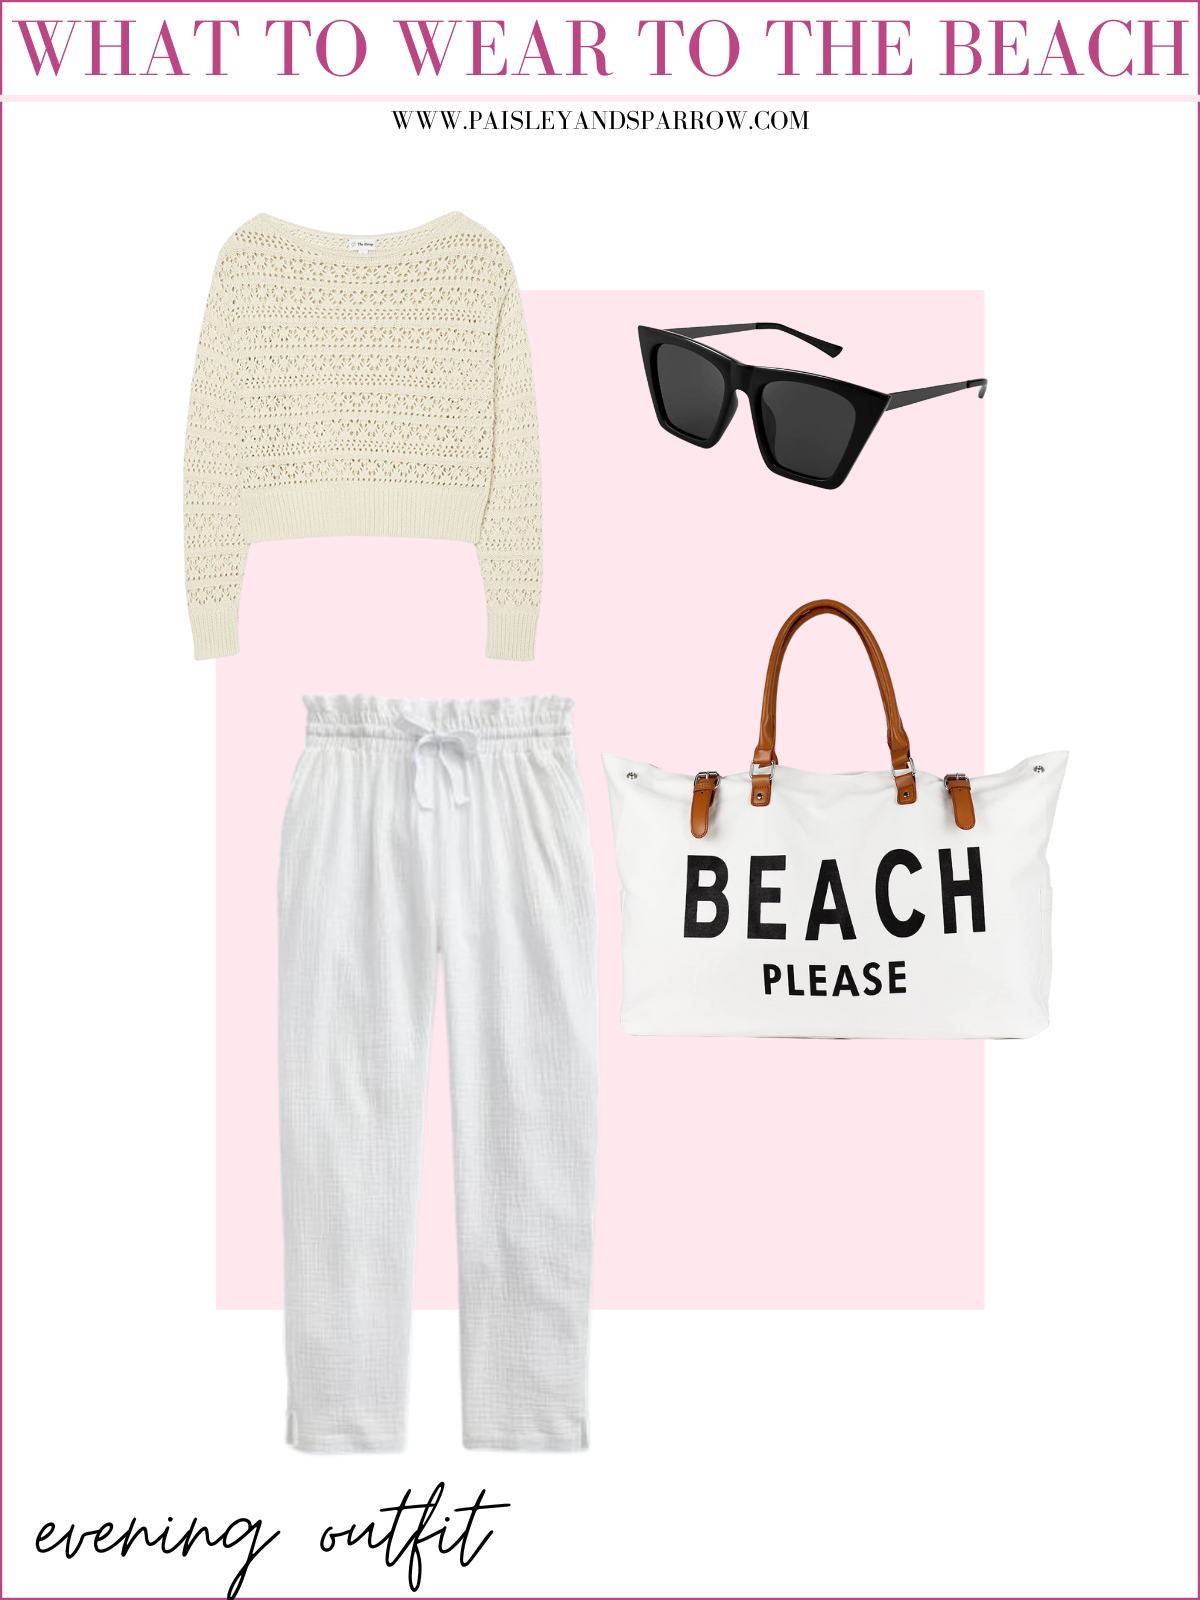 what to wear to the beach in the evening - long pants, crochet top, beach please bag and black sunglasses